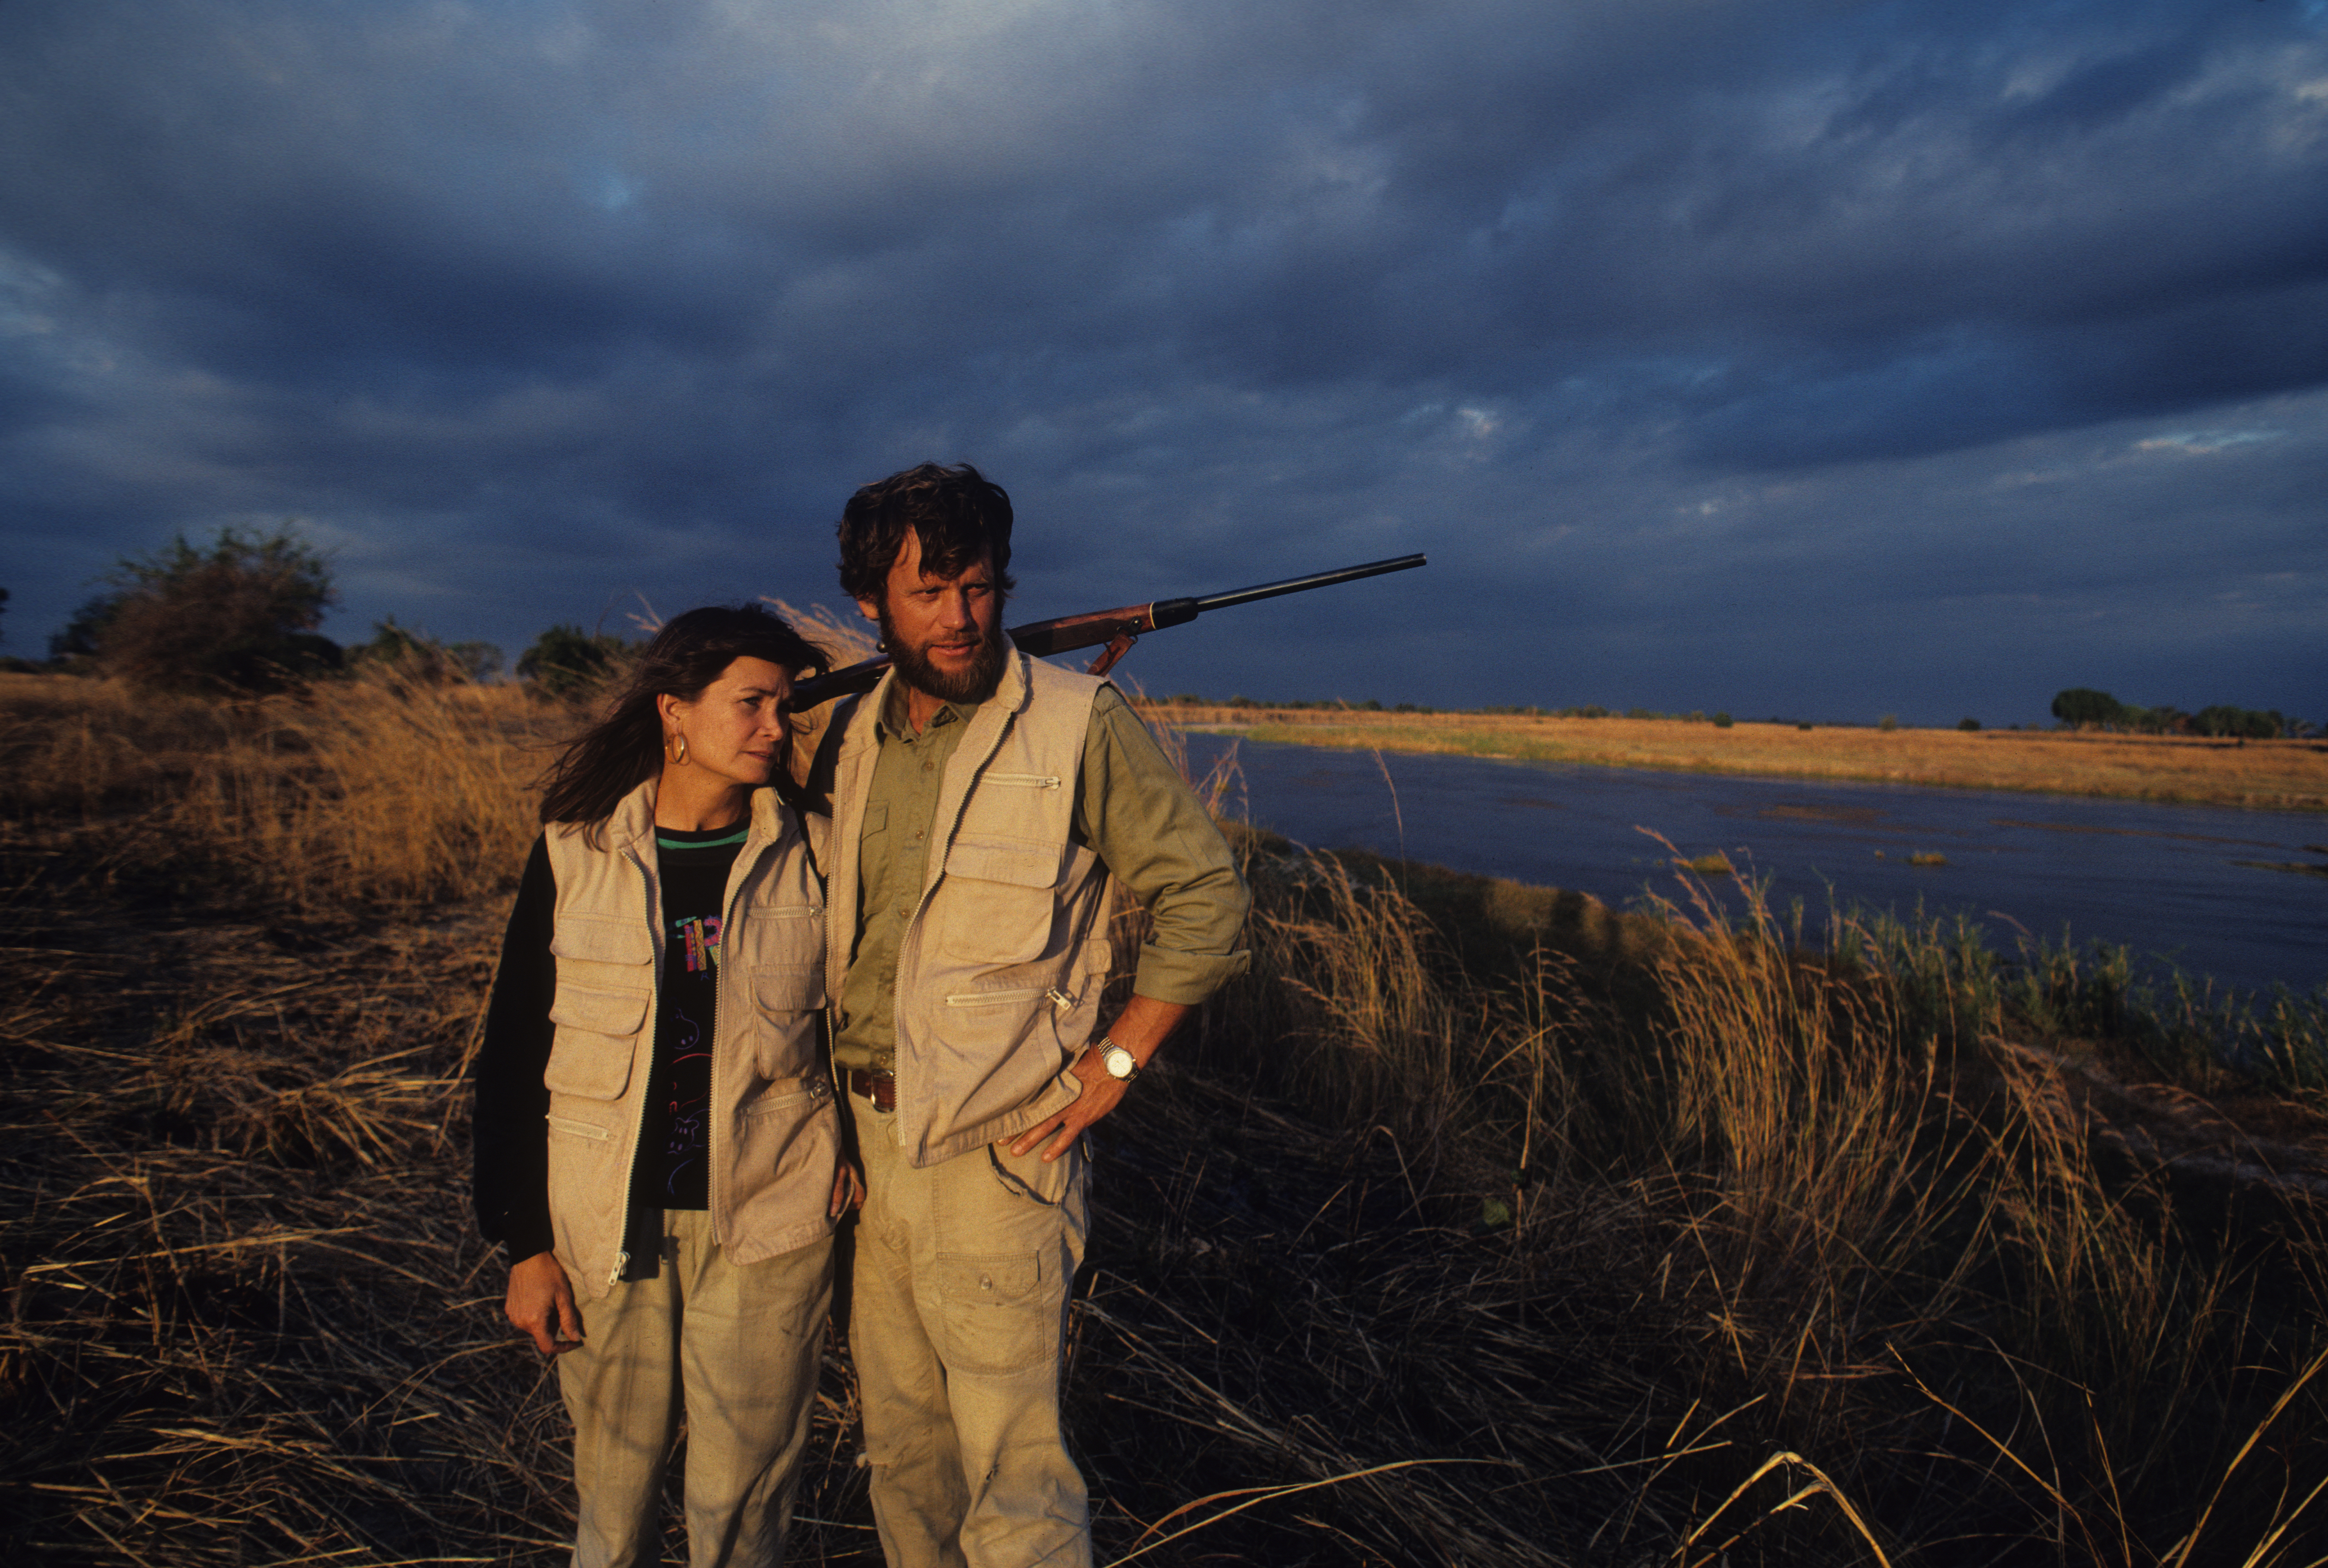 Bestselling author, Delia Owens, and her then-husband in Zambia